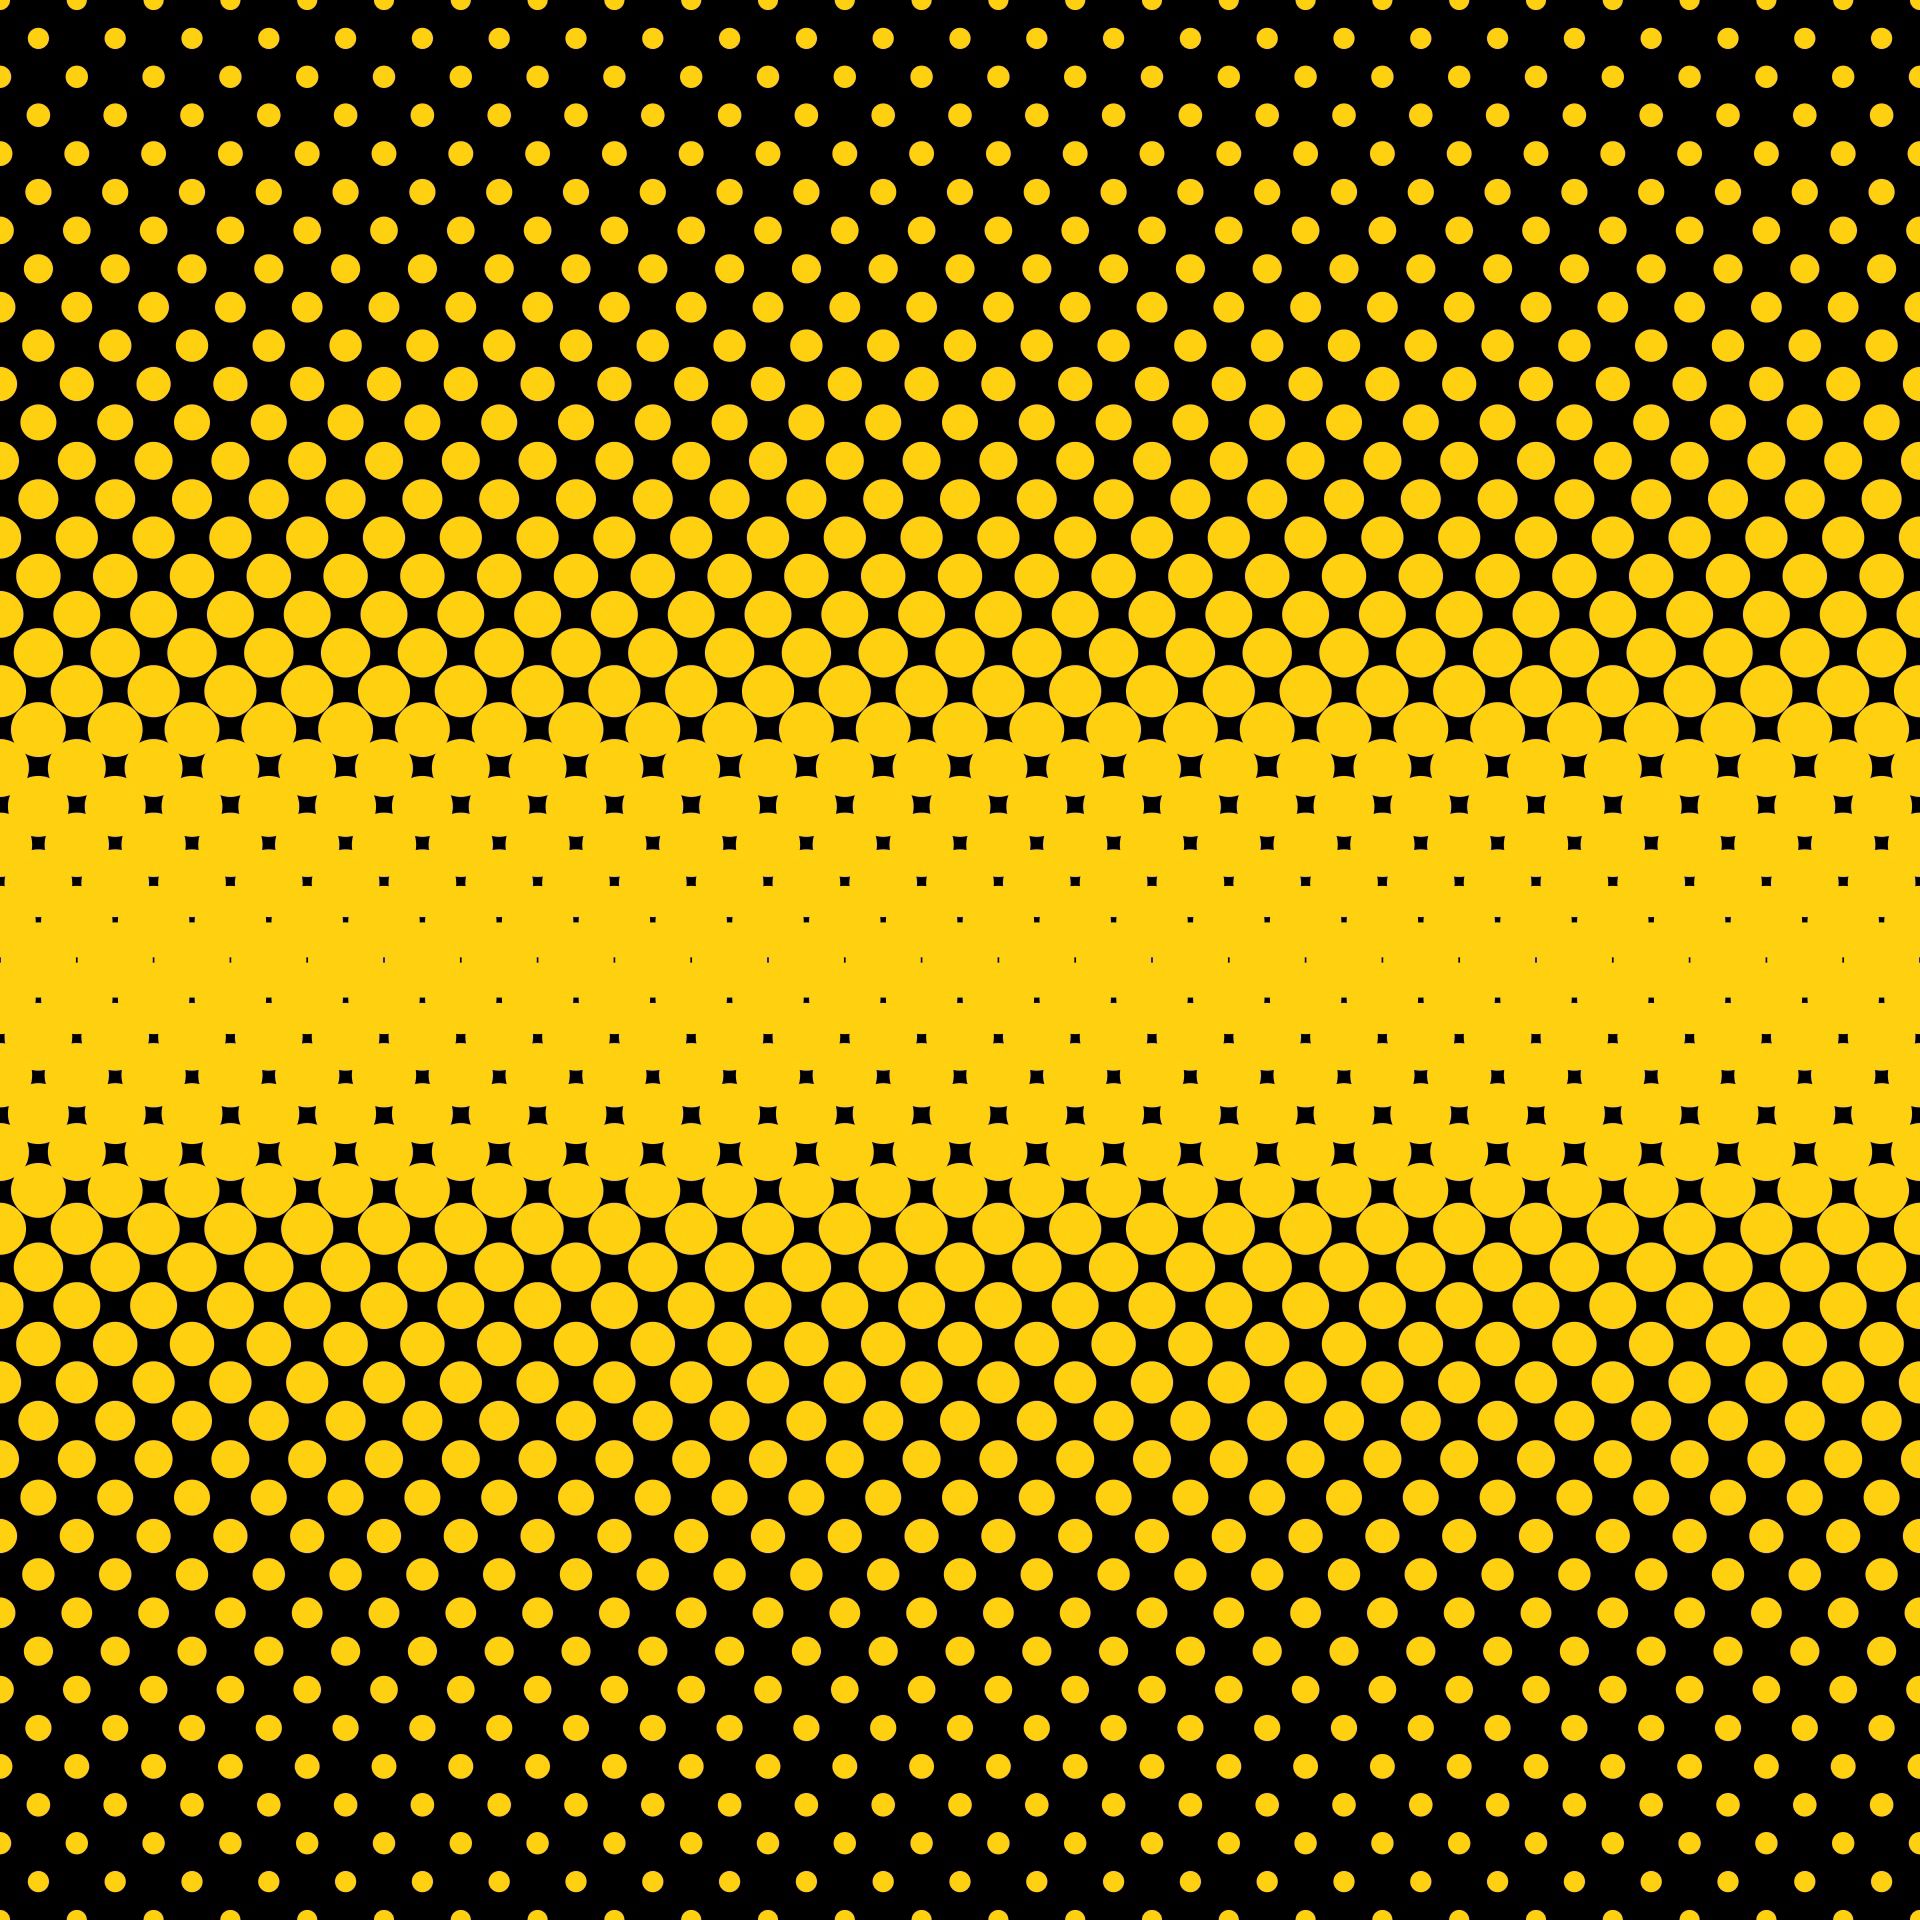 black, yellow, semitone, point, textures, texture, circles, points Full HD